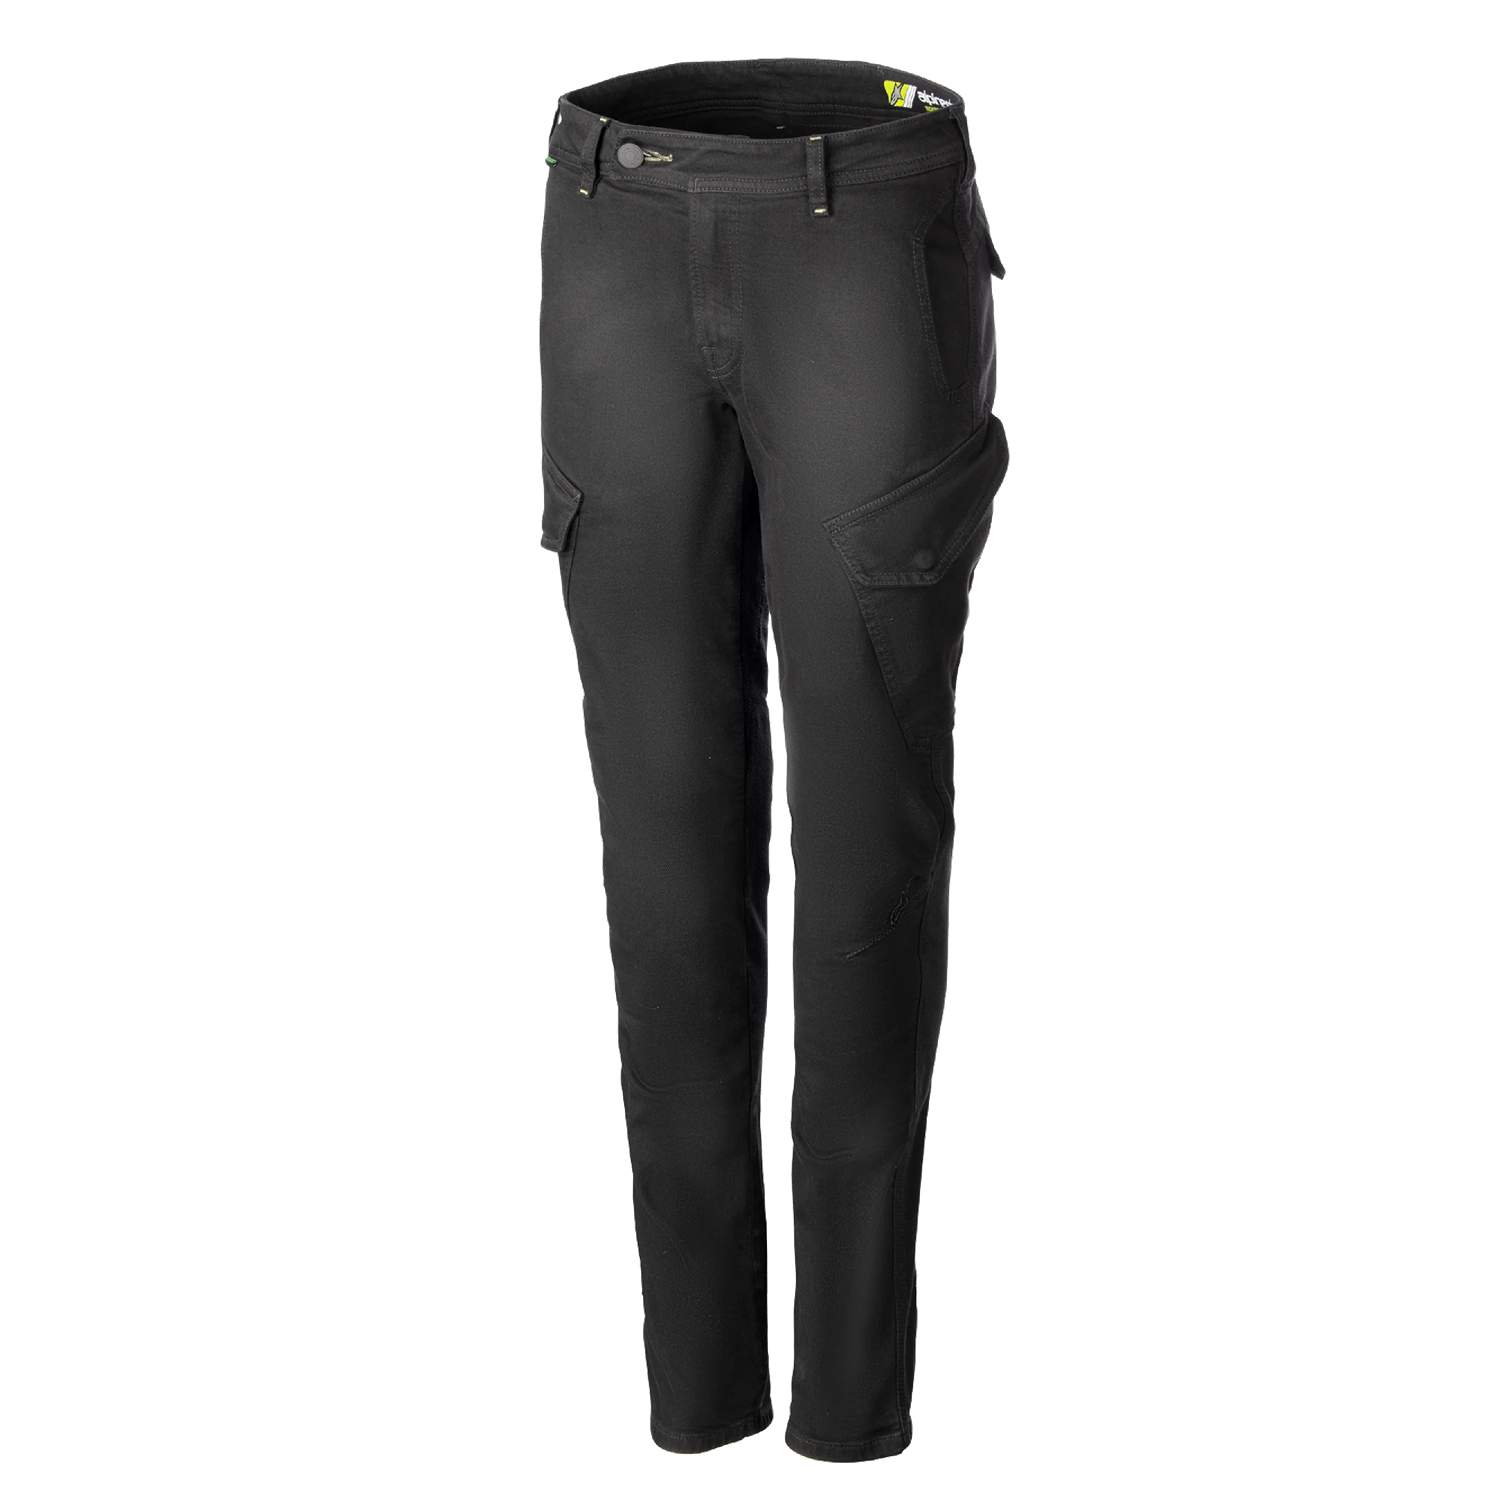 Image of Alpinestars Caliber Women's Tech Riding Pants Anthracite Taille 34